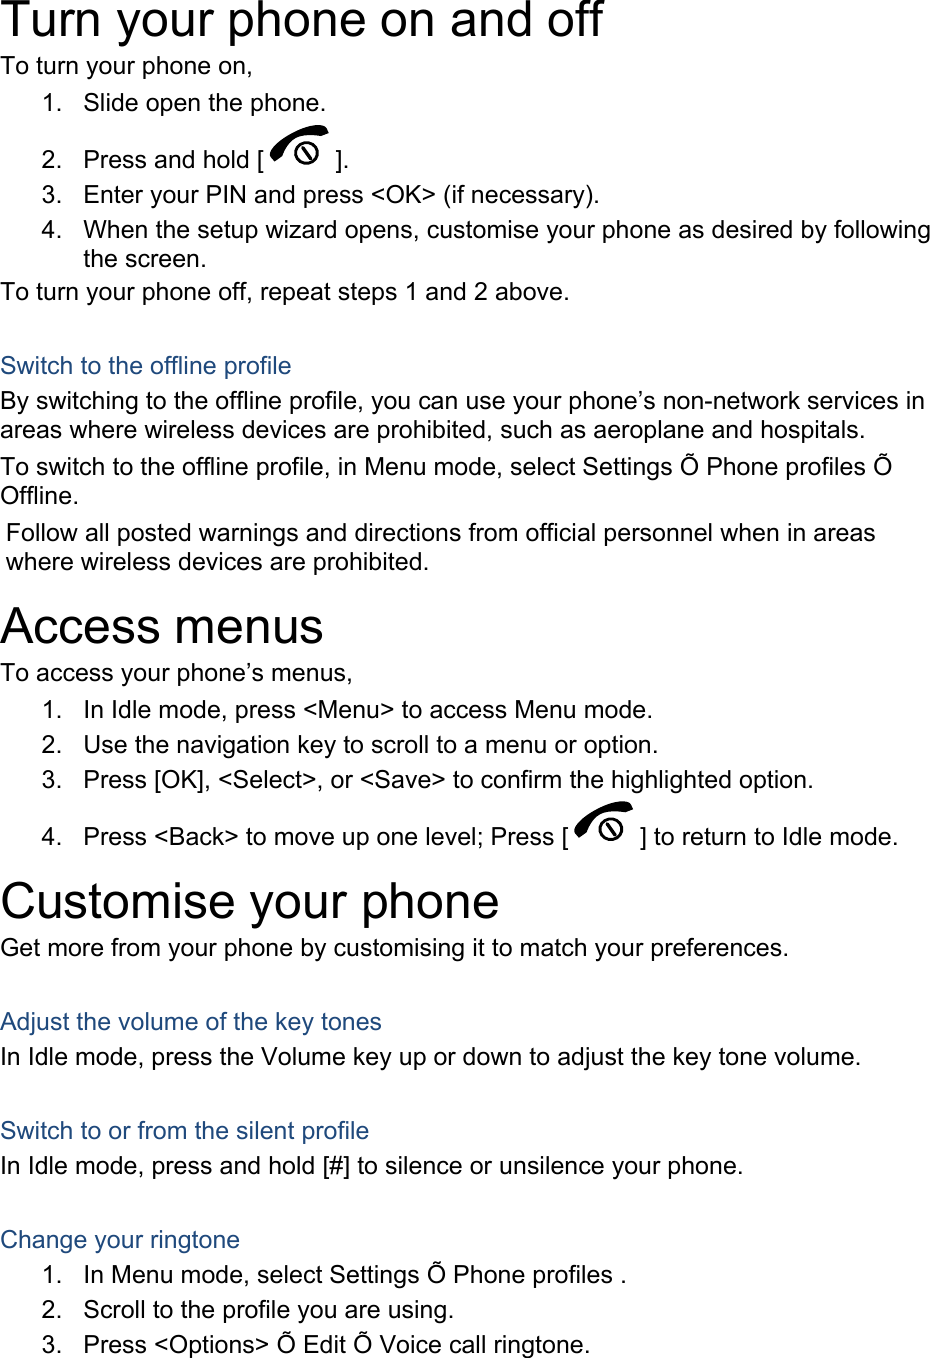  Turn your phone on and off To turn your phone on, 1.  Slide open the phone. 2.  Press and hold [ ]. 3.  Enter your PIN and press &lt;OK&gt; (if necessary). 4.  When the setup wizard opens, customise your phone as desired by following the screen. To turn your phone off, repeat steps 1 and 2 above.  Switch to the offline profile By switching to the offline profile, you can use your phone’s non-network services in areas where wireless devices are prohibited, such as aeroplane and hospitals. To switch to the offline profile, in Menu mode, select Settings Õ Phone profiles Õ Offline. Follow all posted warnings and directions from official personnel when in areas where wireless devices are prohibited. Access menus To access your phone’s menus, 1.  In Idle mode, press &lt;Menu&gt; to access Menu mode. 2.  Use the navigation key to scroll to a menu or option. 3.  Press [OK], &lt;Select&gt;, or &lt;Save&gt; to confirm the highlighted option. 4.  Press &lt;Back&gt; to move up one level; Press [ ] to return to Idle mode. Customise your phone Get more from your phone by customising it to match your preferences.  Adjust the volume of the key tones In Idle mode, press the Volume key up or down to adjust the key tone volume.  Switch to or from the silent profile In Idle mode, press and hold [#] to silence or unsilence your phone.  Change your ringtone 1.  In Menu mode, select Settings Õ Phone profiles . 2.  Scroll to the profile you are using. 3.  Press &lt;Options&gt; Õ Edit Õ Voice call ringtone. 